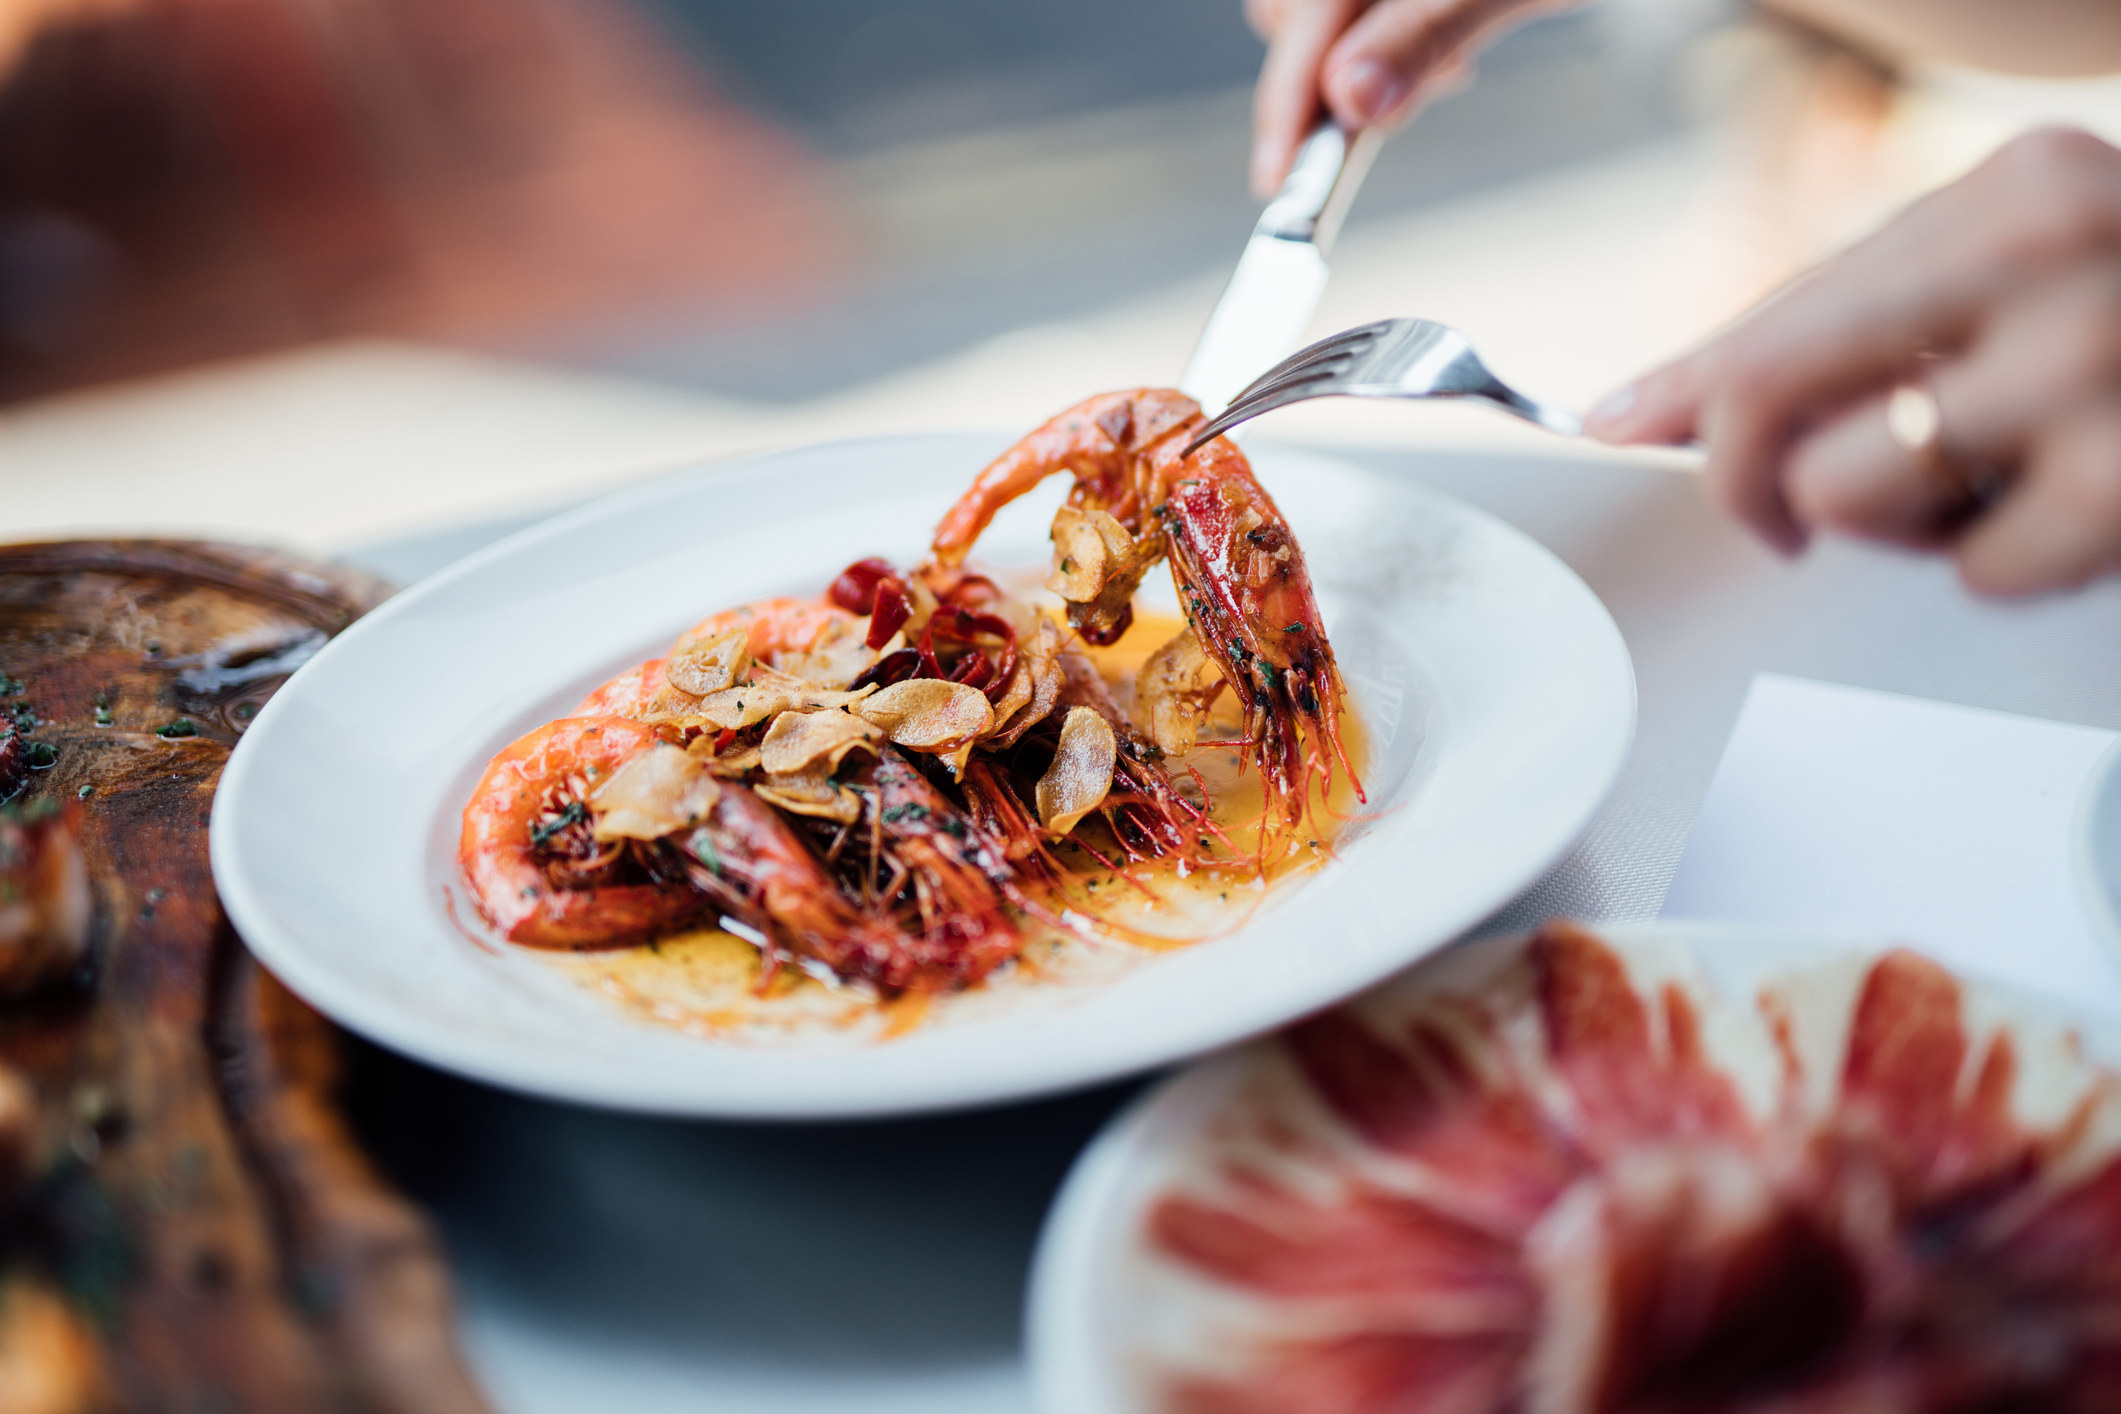 A Spanish lunch with grilled shrimp and jamon iberico.